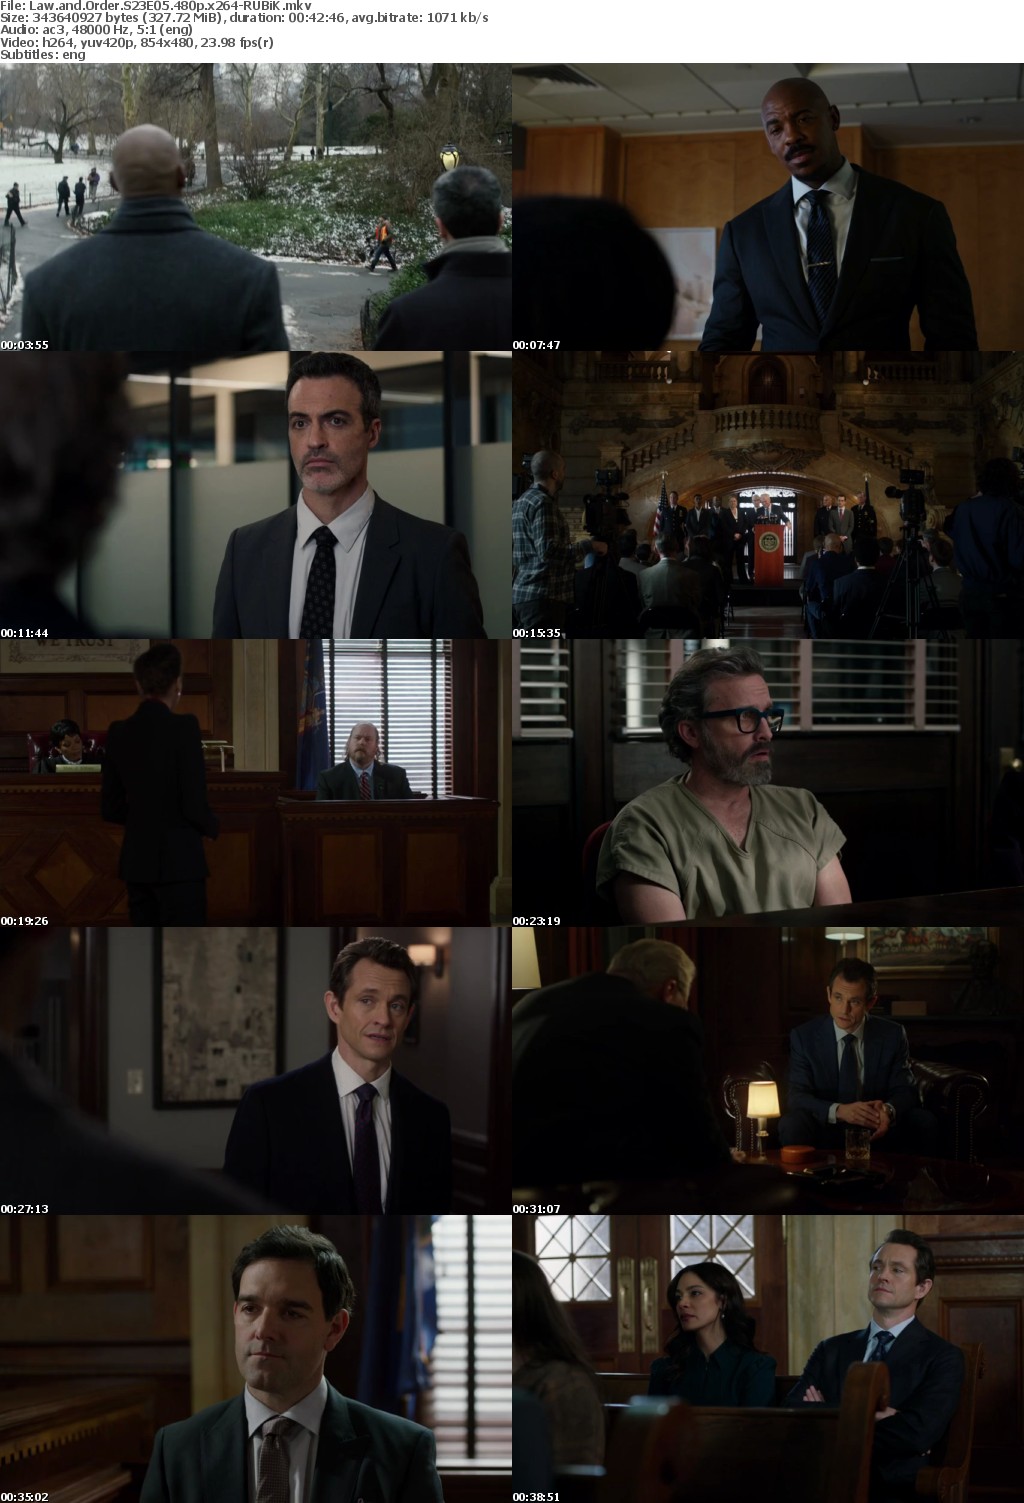 Law and Order S23E05 480p x264-RUBiK Saturn5